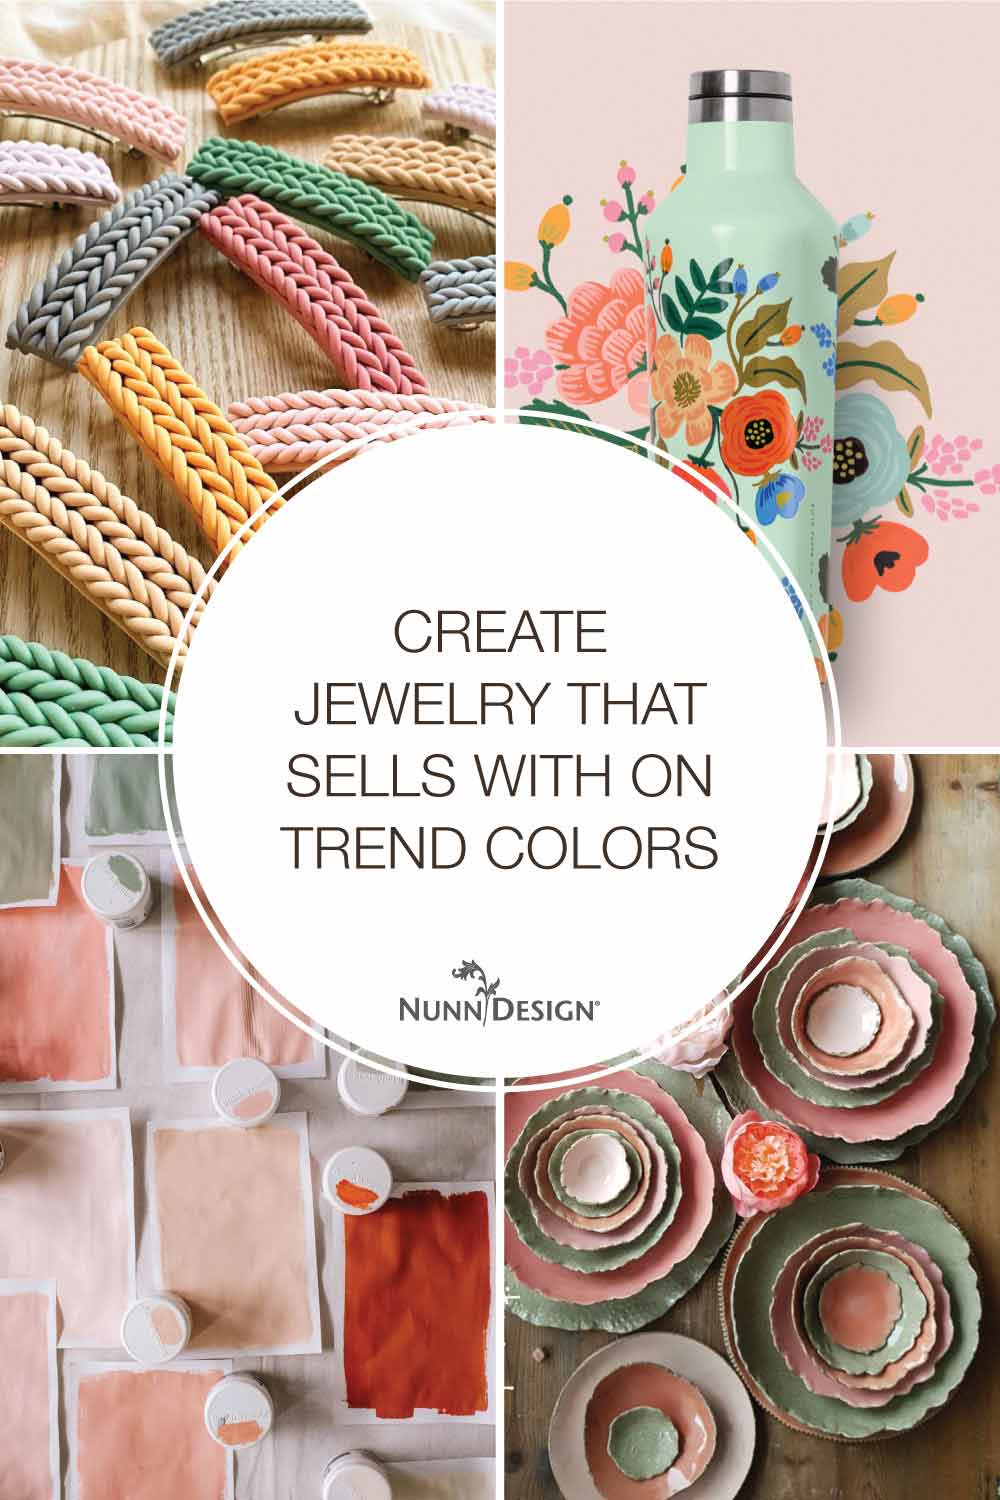 Create Jewelry That Sells with On Trend Colors